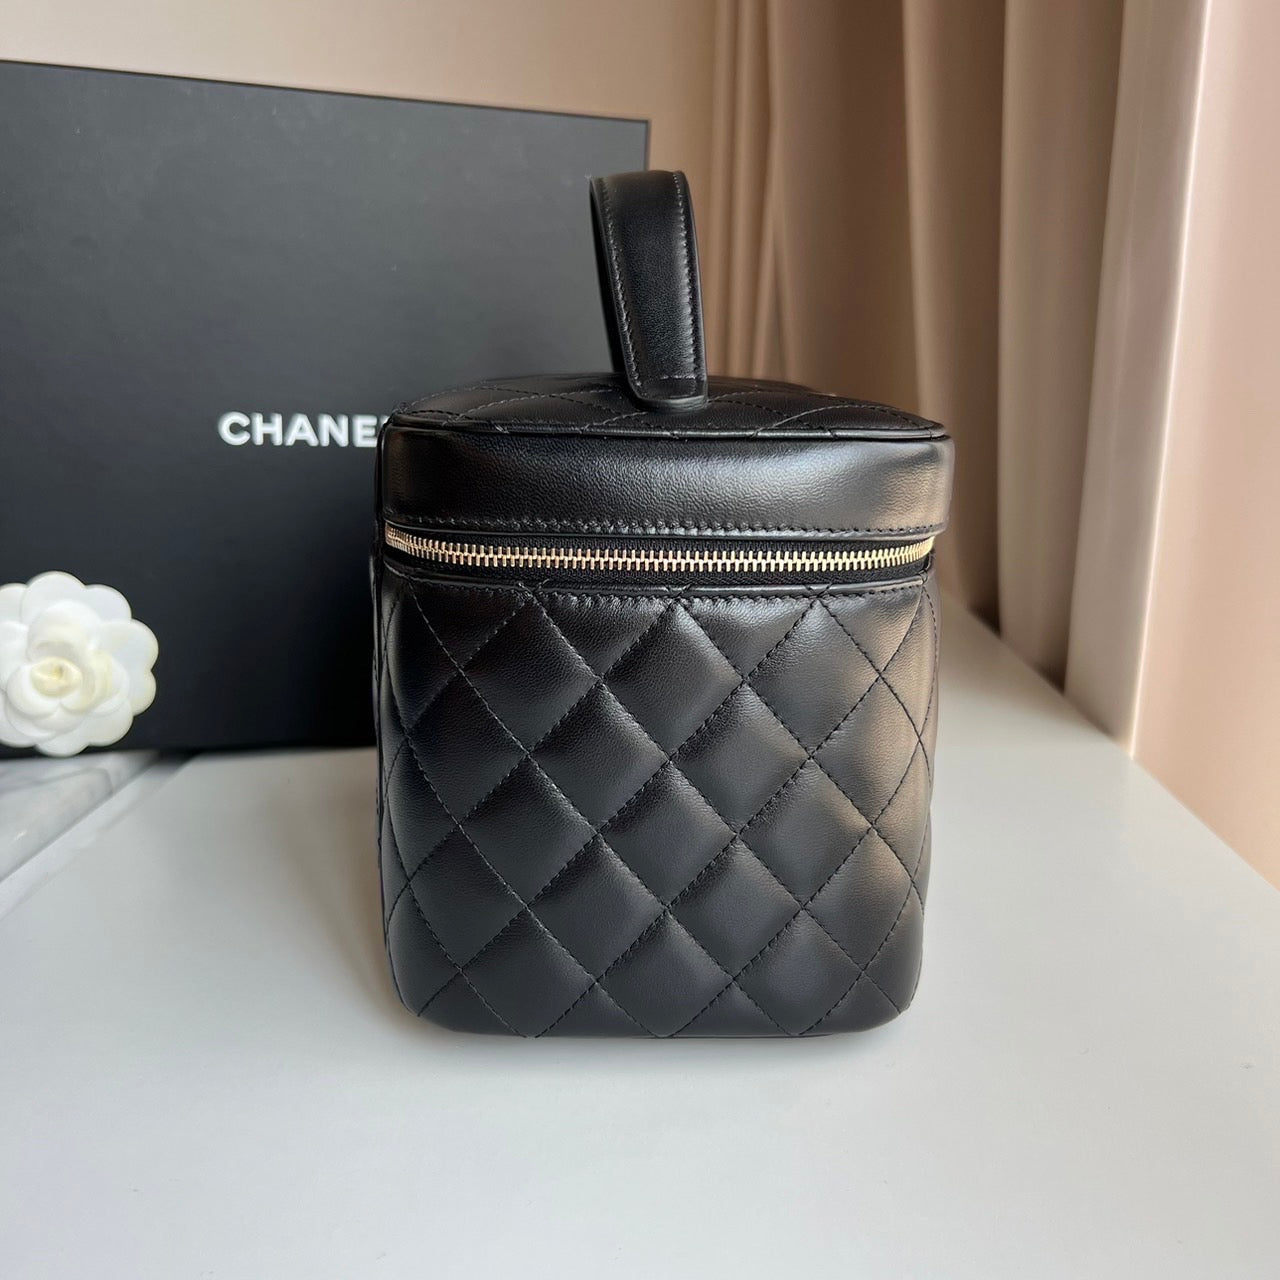 Sold at Auction CHANEL BeautySet